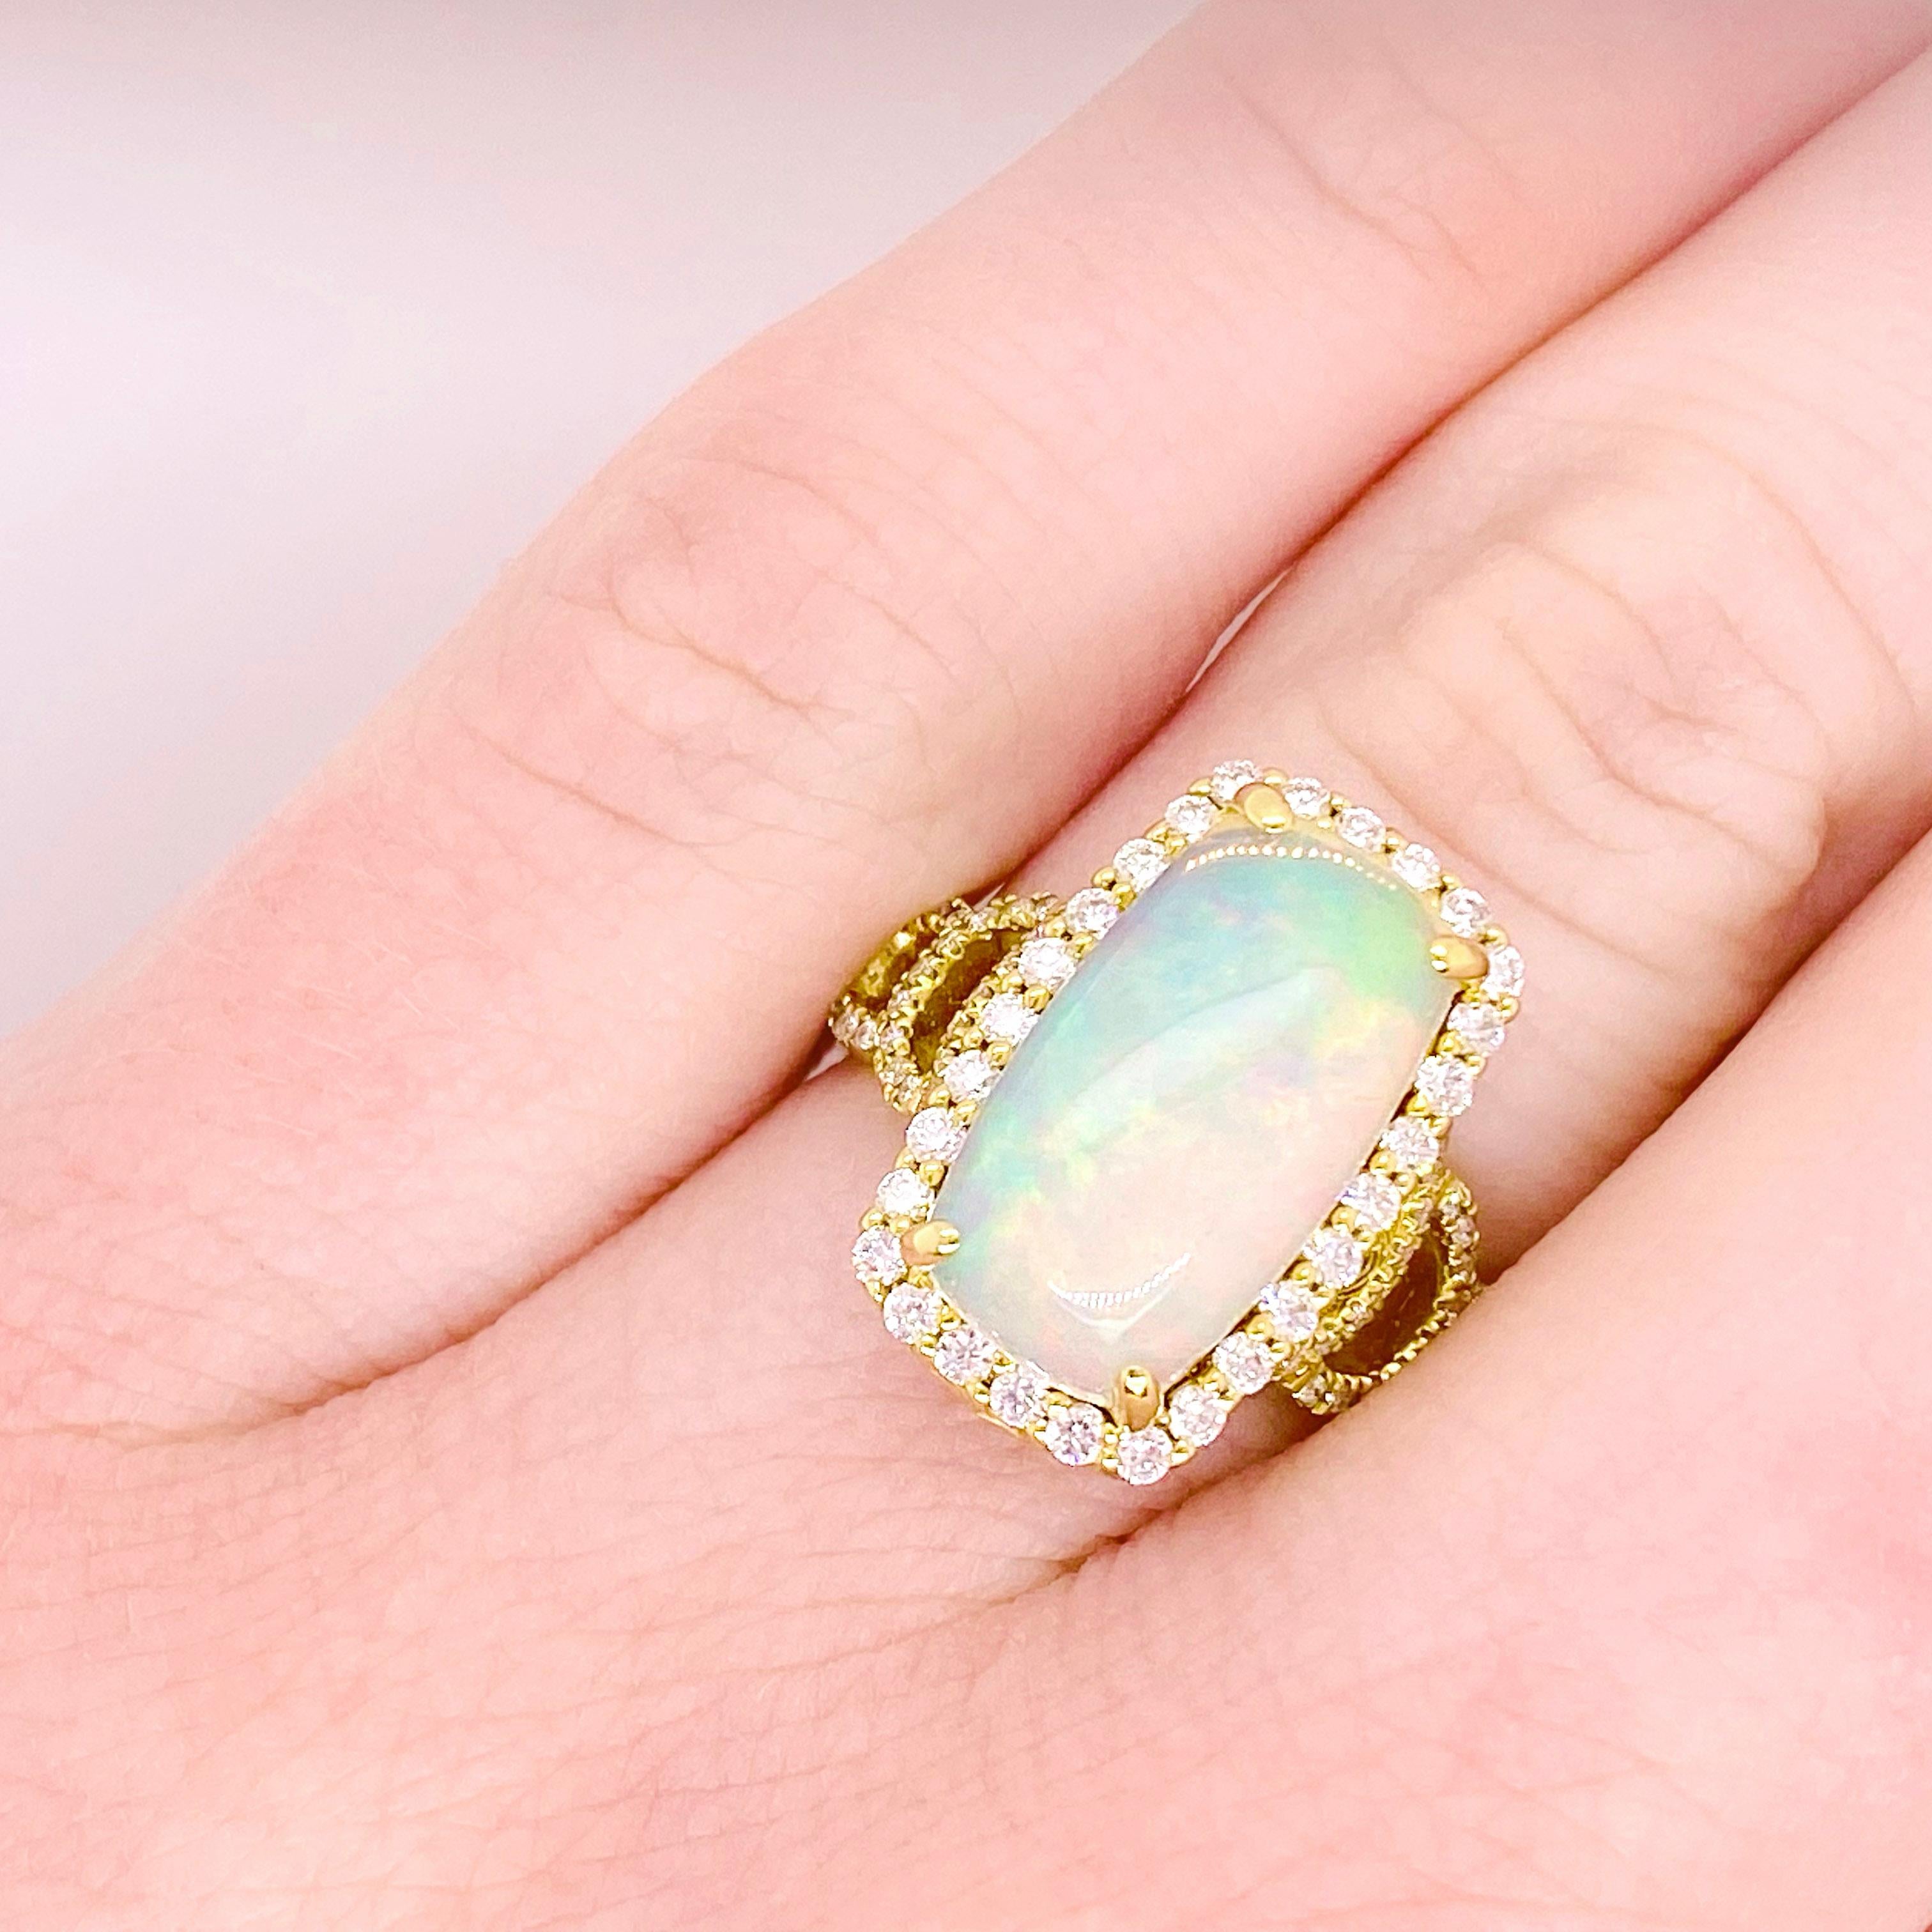 Australian opals can vary from white to fiery and this 3.40 carat cushion cut opal is definitely a very fine specimen! The bright colors that reflect the light are iridescent and all the colors of the rainbow! This ring is a gorgeous design that